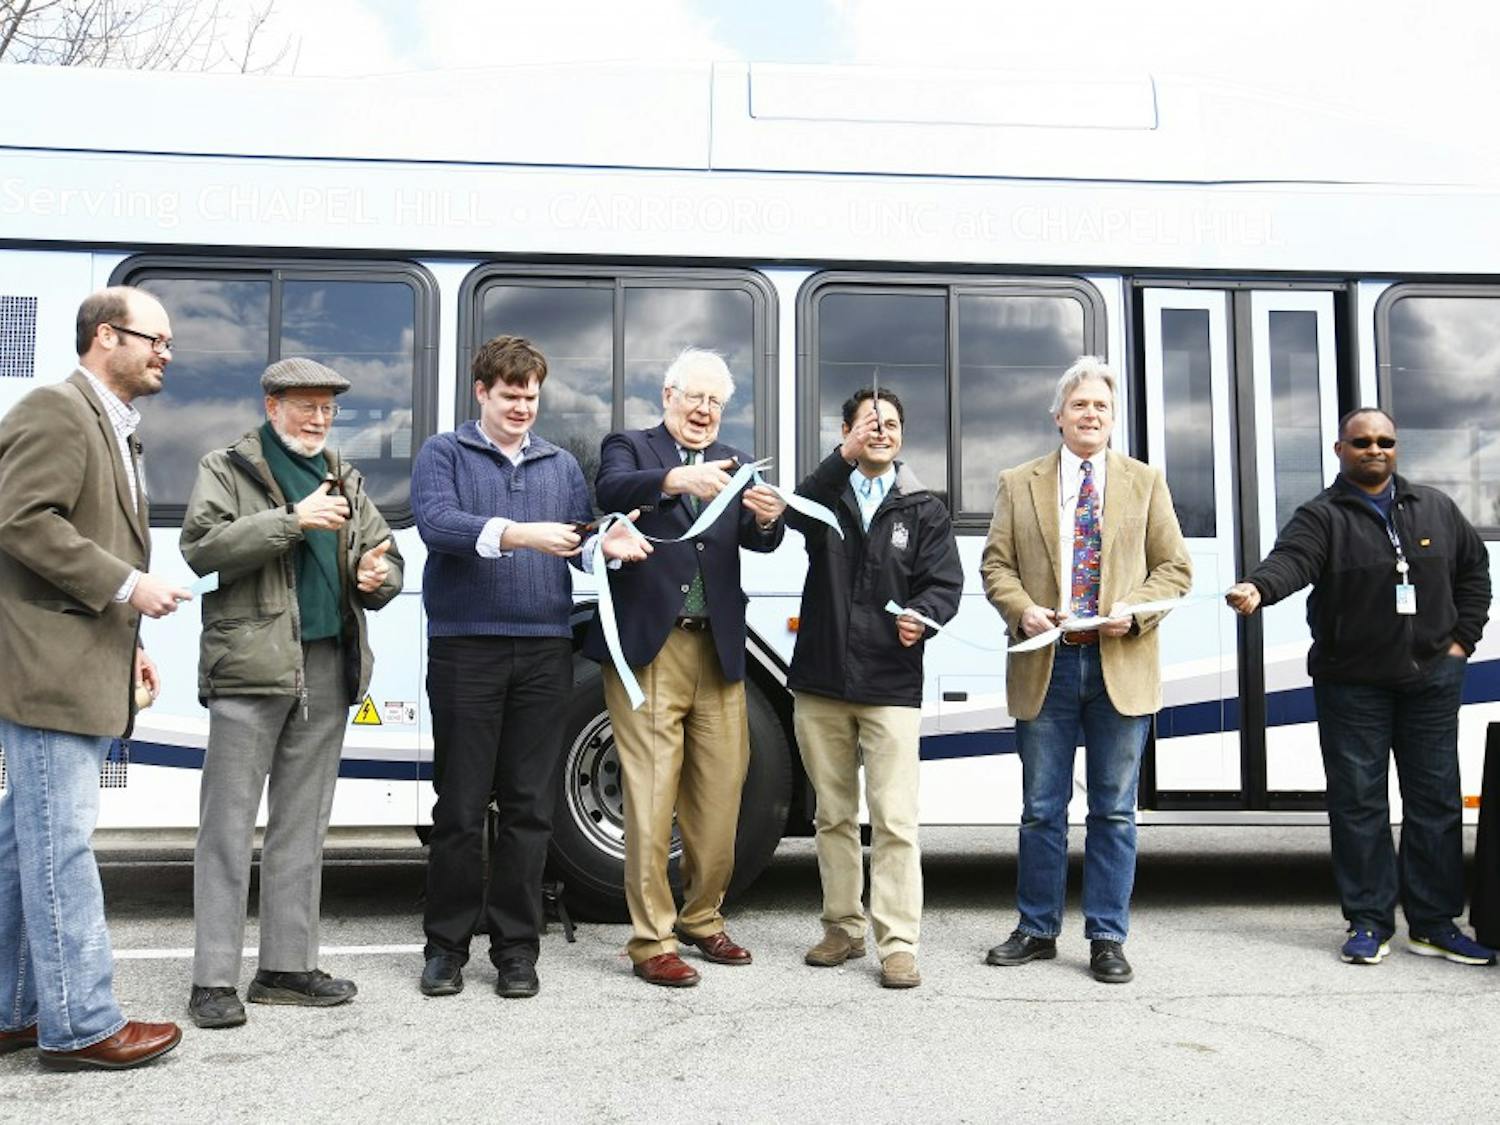 The Town of Chapel Hill unveils the 15 new hybrid-electric buses of its transit line. Chapel Hill Mayor Mark Kleinschmidt and Congressman David Price were two of the speakers at the event on Saturday afternoon at University Mall.From left: Assistant Transit Director Brian Lichtfield, Mayor Pro Temp Ed Harrison, Town Councilman Lee Storrow, Congressman David Price, Mayor Mark Kleinschimdt, Town Councilman Jim Ward and a CHT bus driver cut the ribbon to welcome in the new buses to the fleet. 